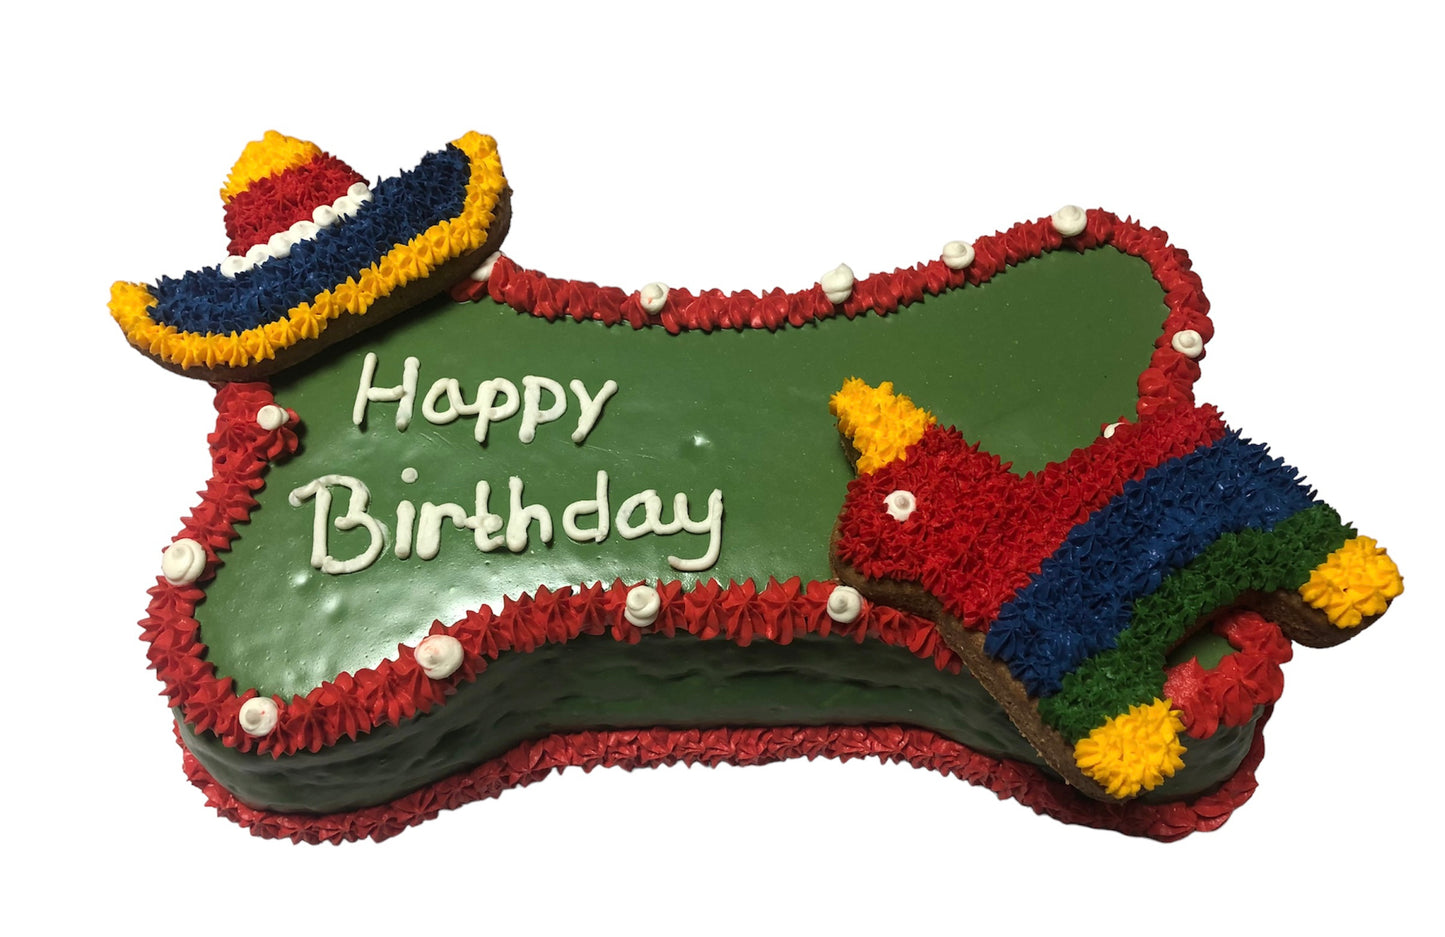 This specialty fiesta cake can be made into any theme, to add a bit of flair to your pups next pawty!